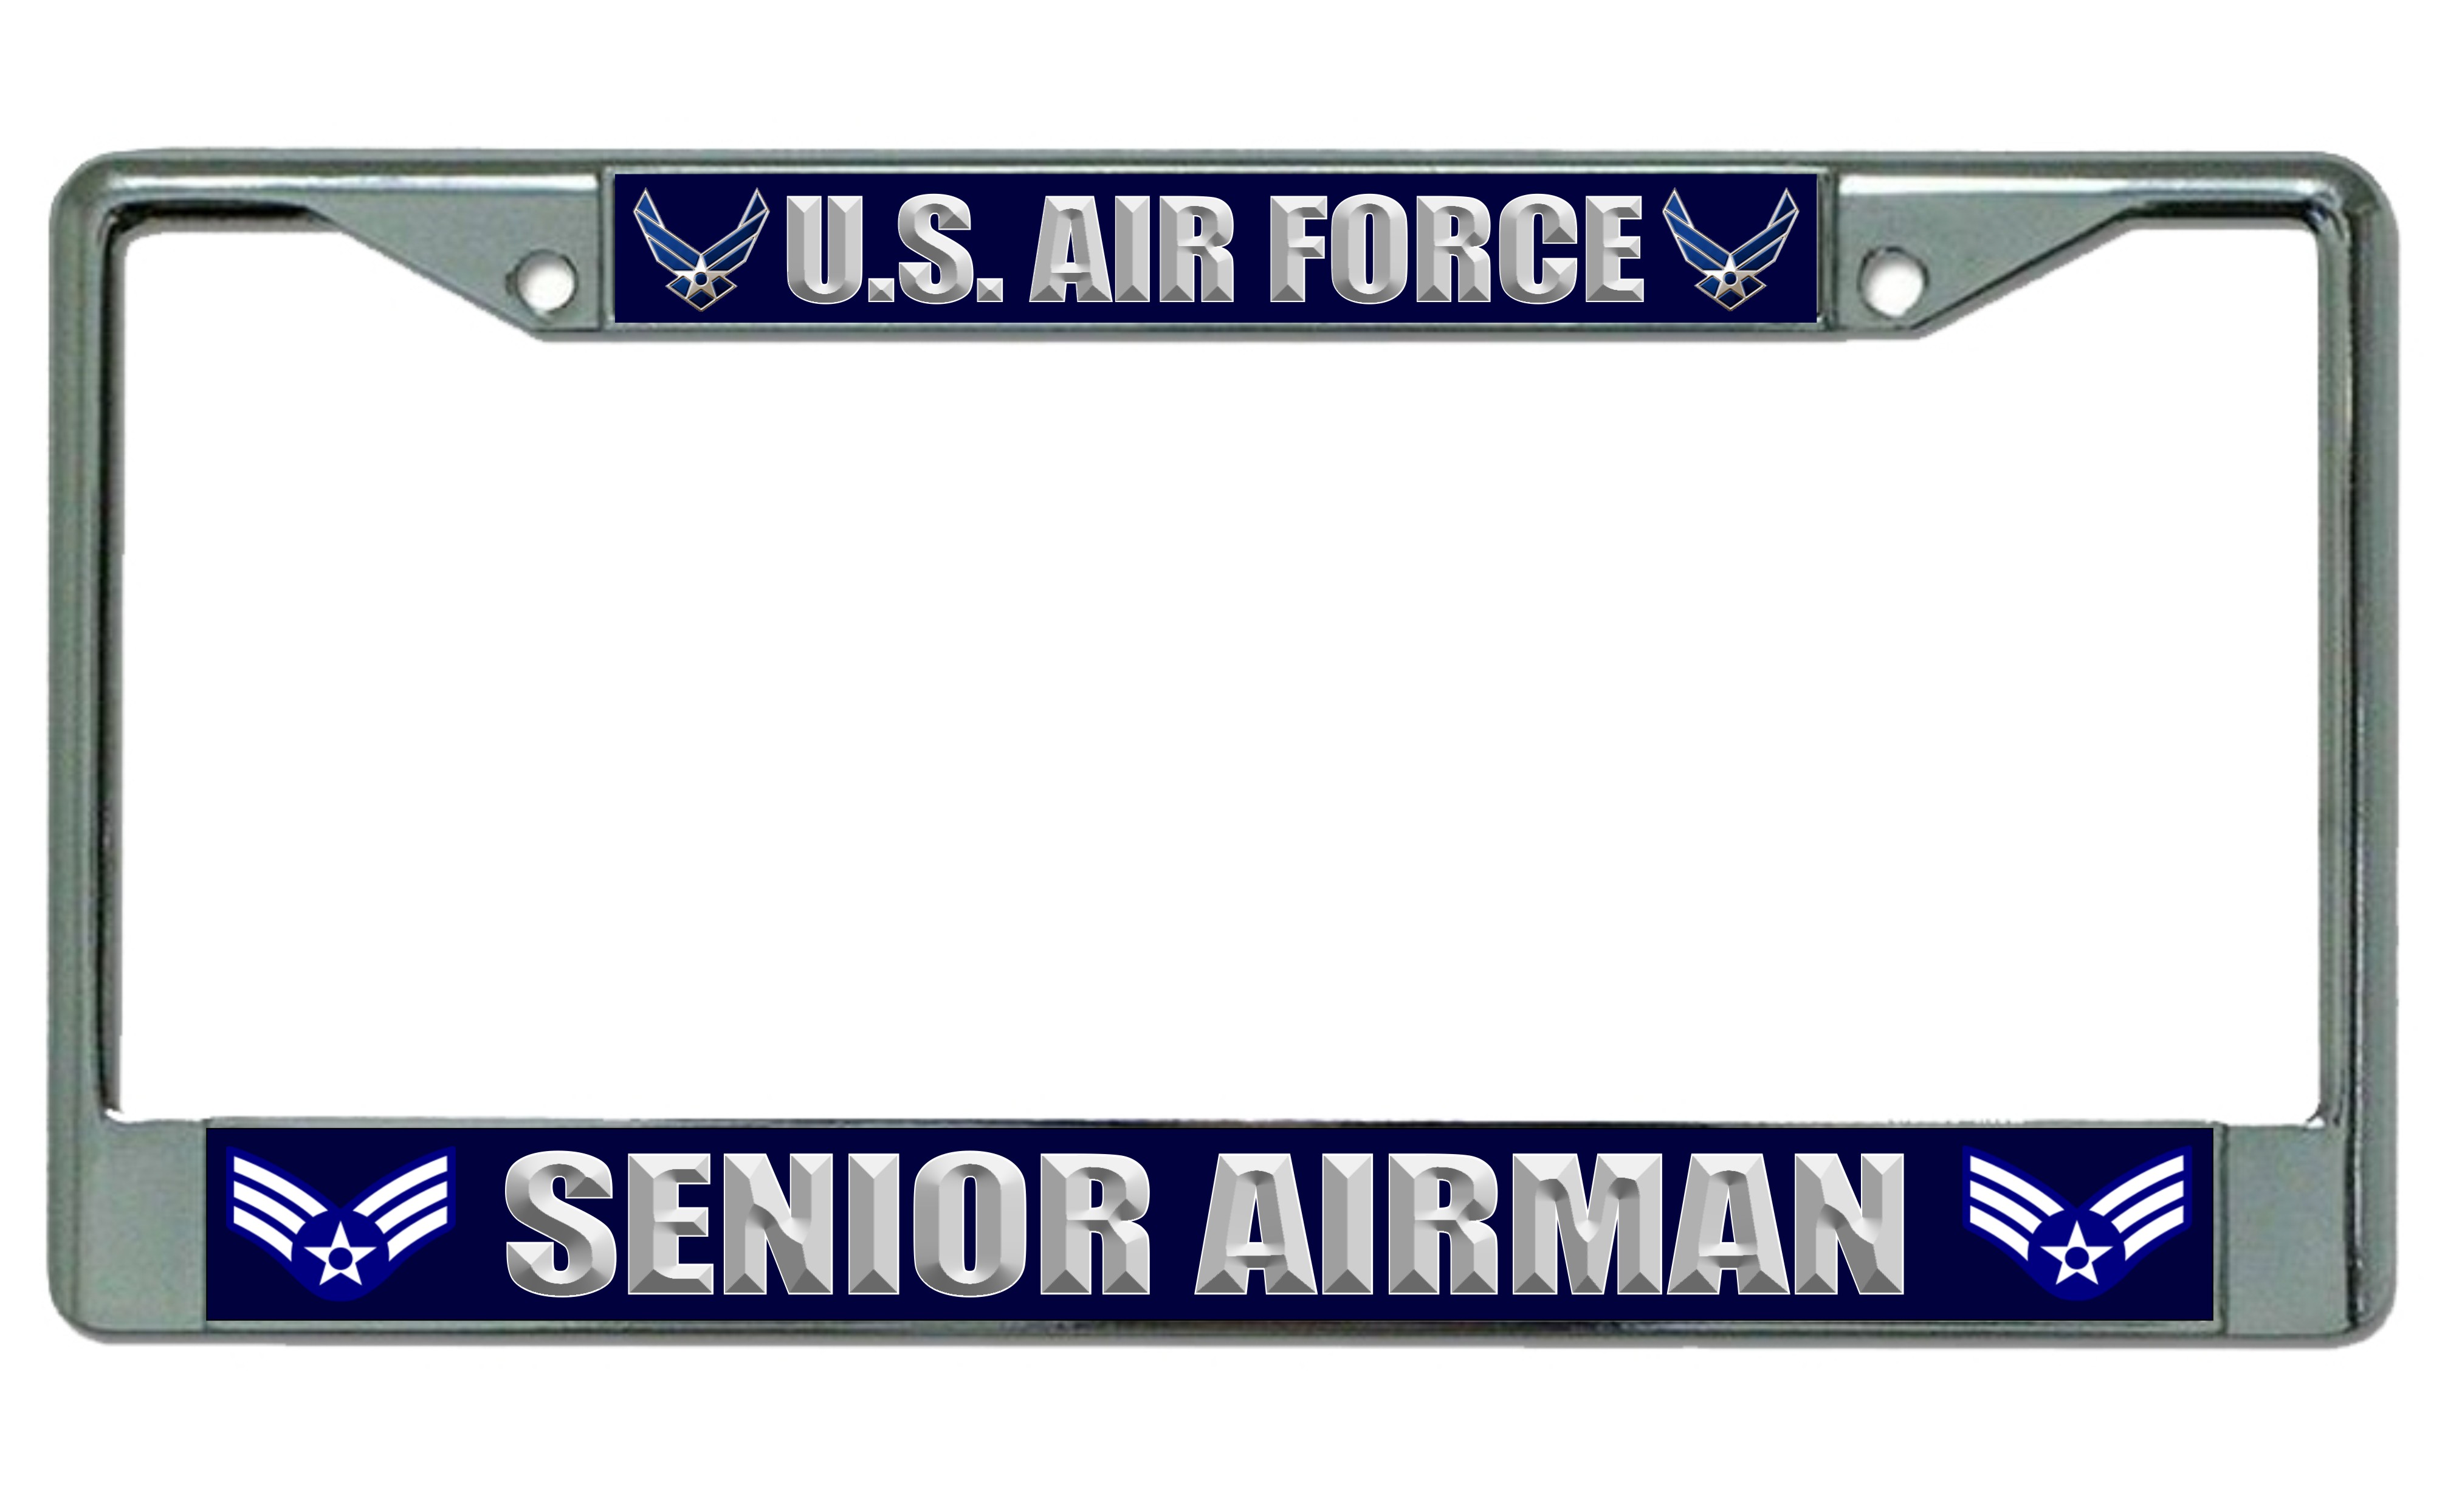 License Plates Online U.S. Air Force Senior Airman Photo License Frame.  Free Screw Caps Included